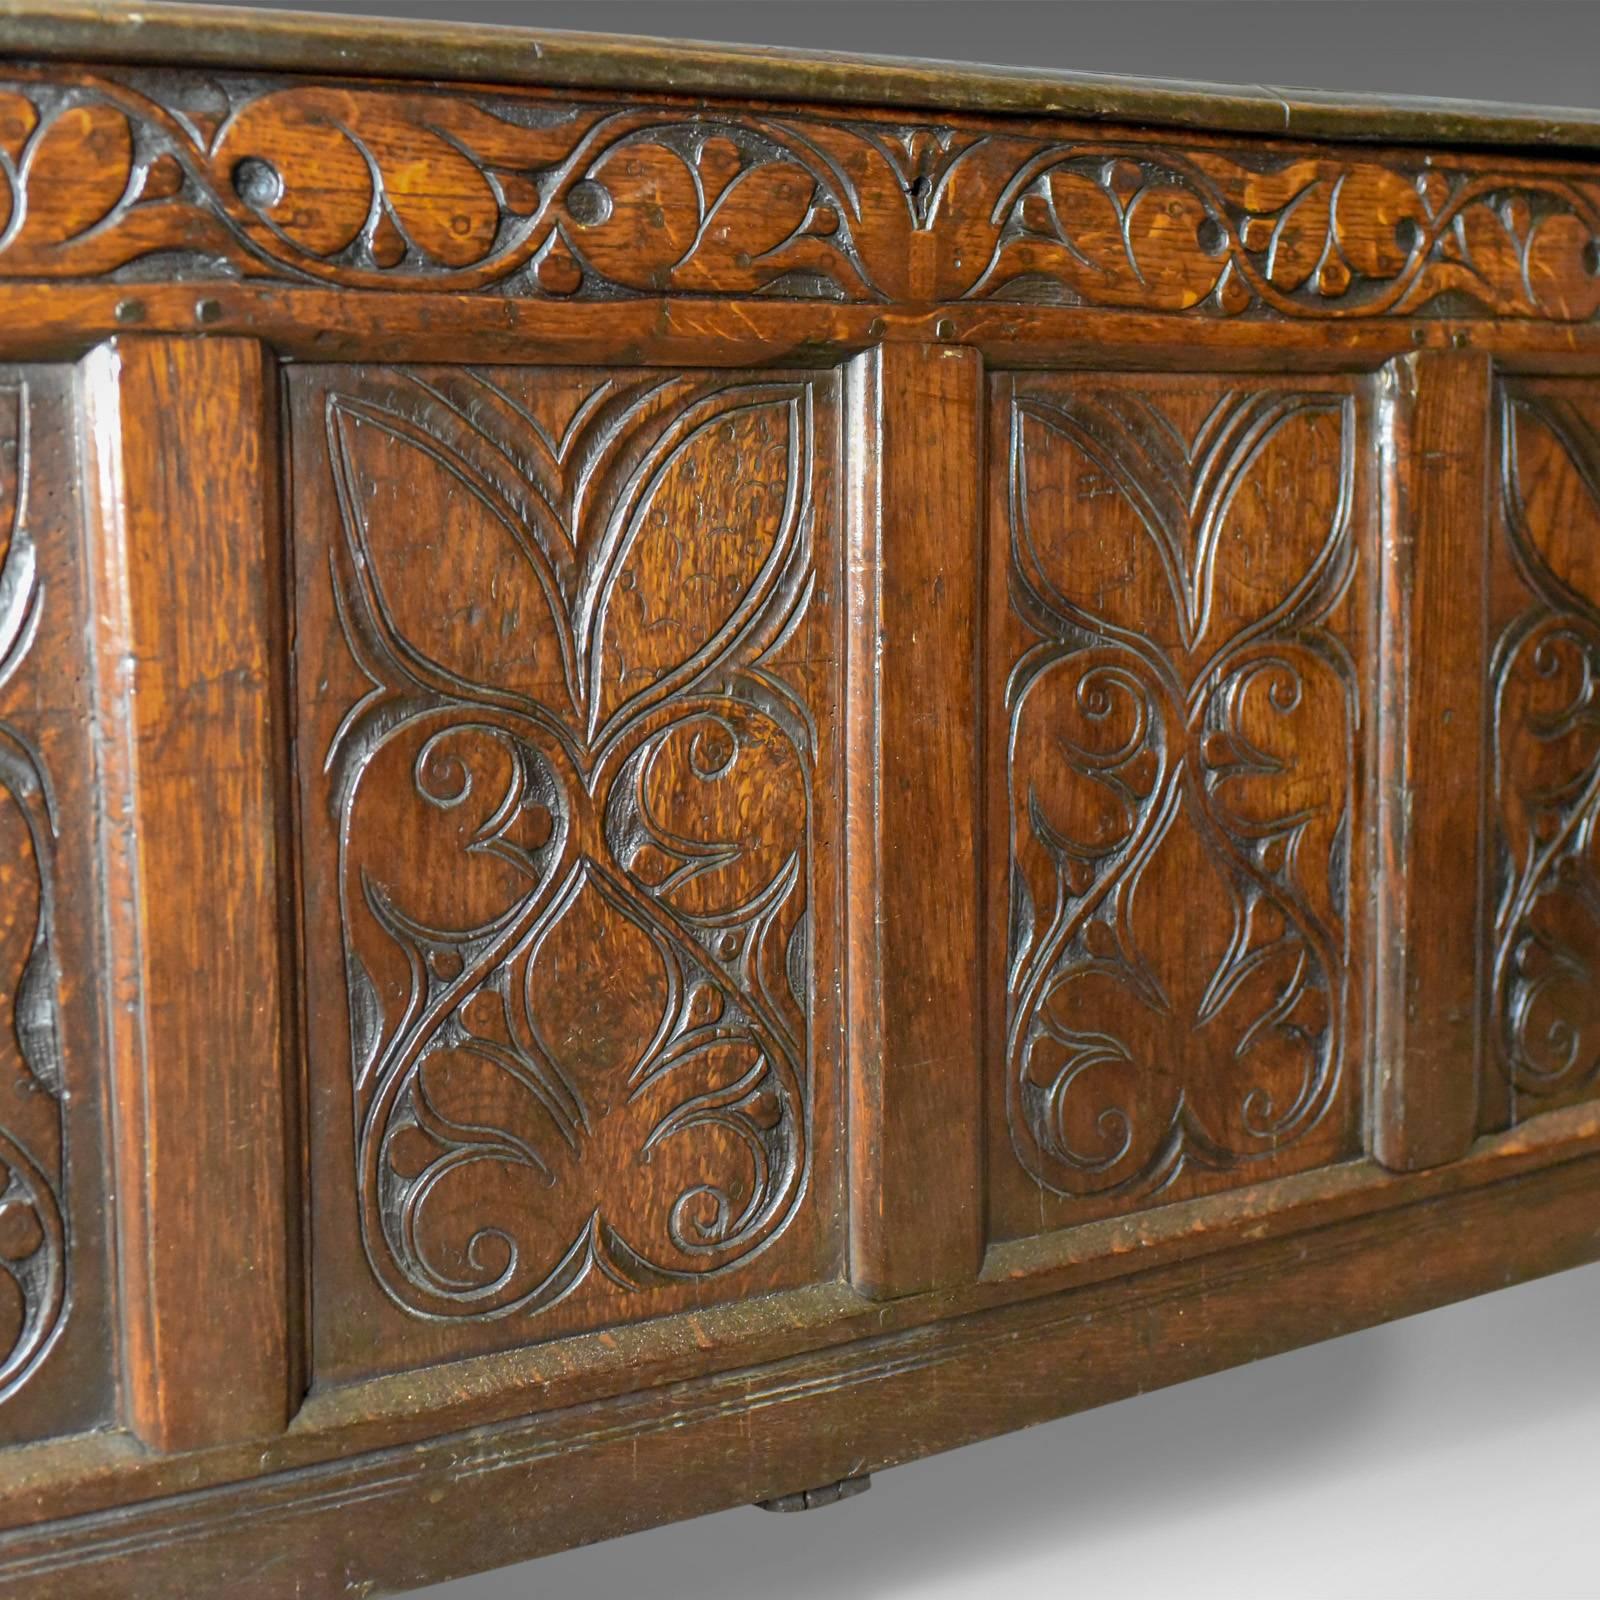 Antique Coffer, Large, English Oak Chest, Early 18th Century Trunk, circa 1700 For Sale 1